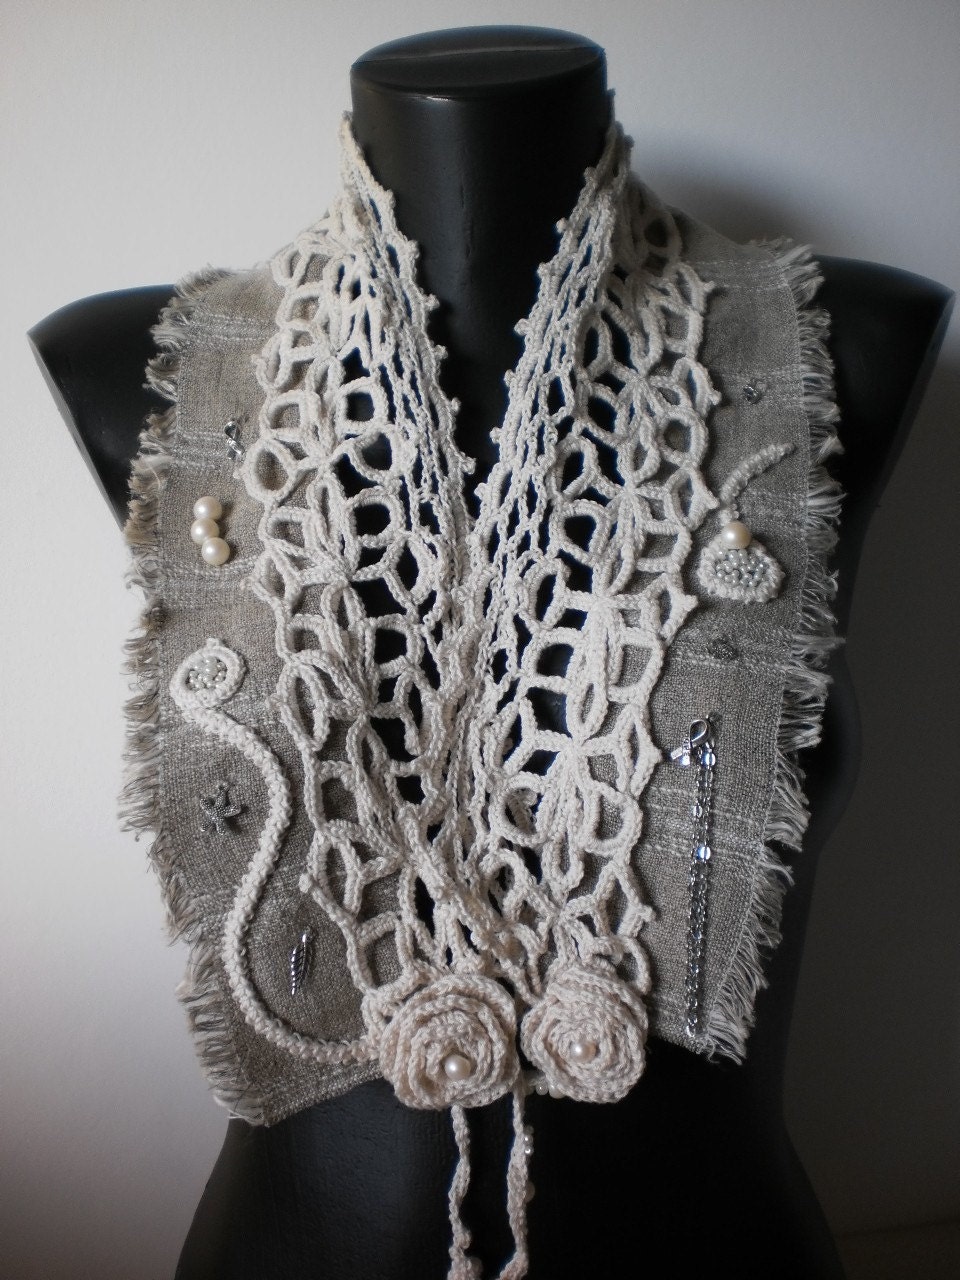 REDUCED Indian Summer - Scarf - Collar  - Wearable Art - Lace - Spring Fashion - levintovich